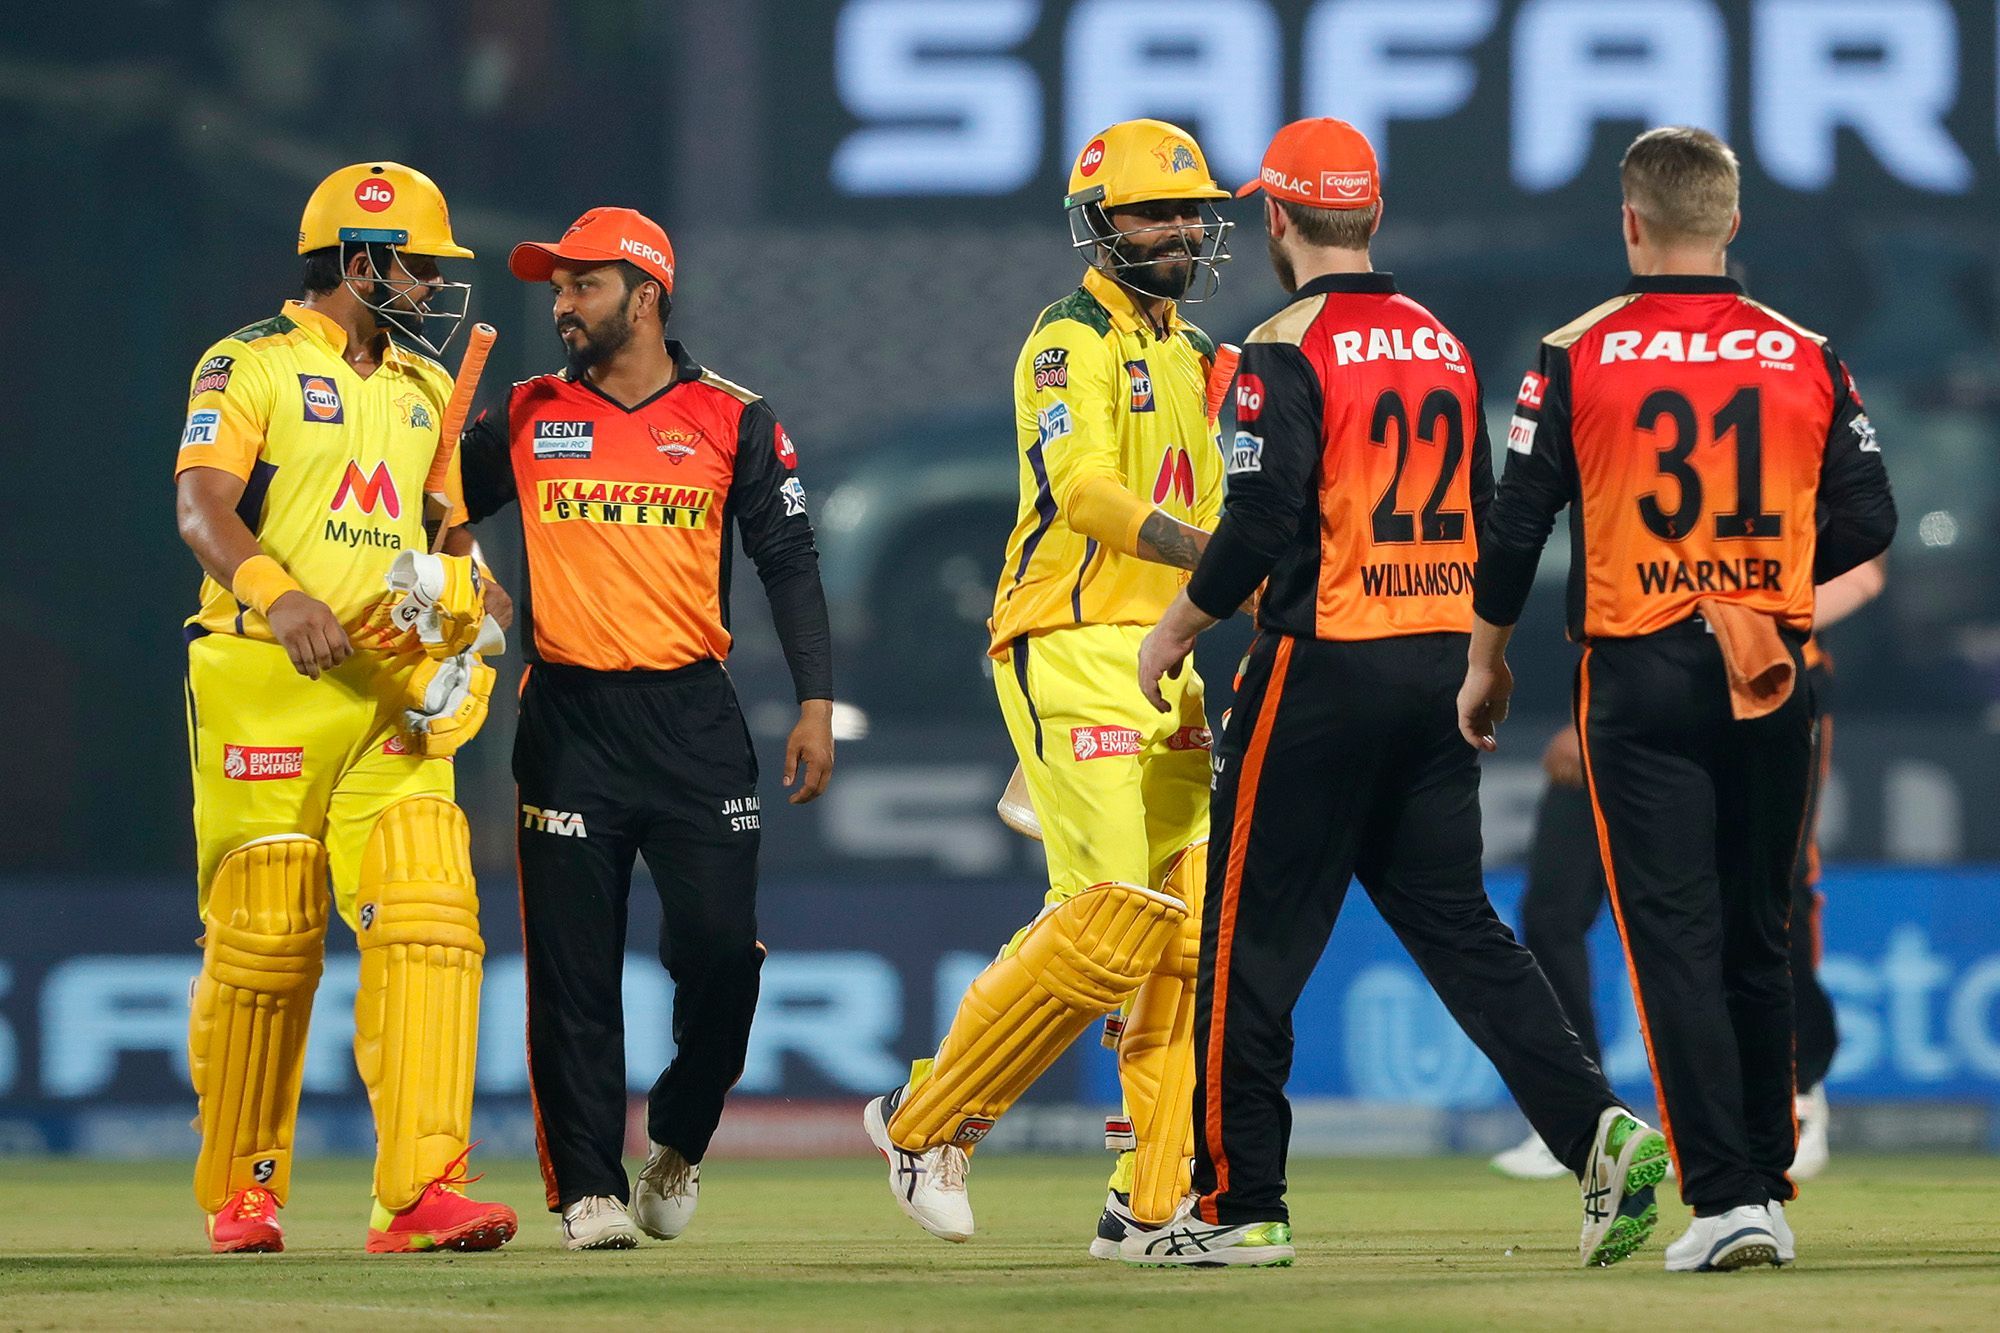 CSK defeated SRH by 7 wickets | BCCI/IPL